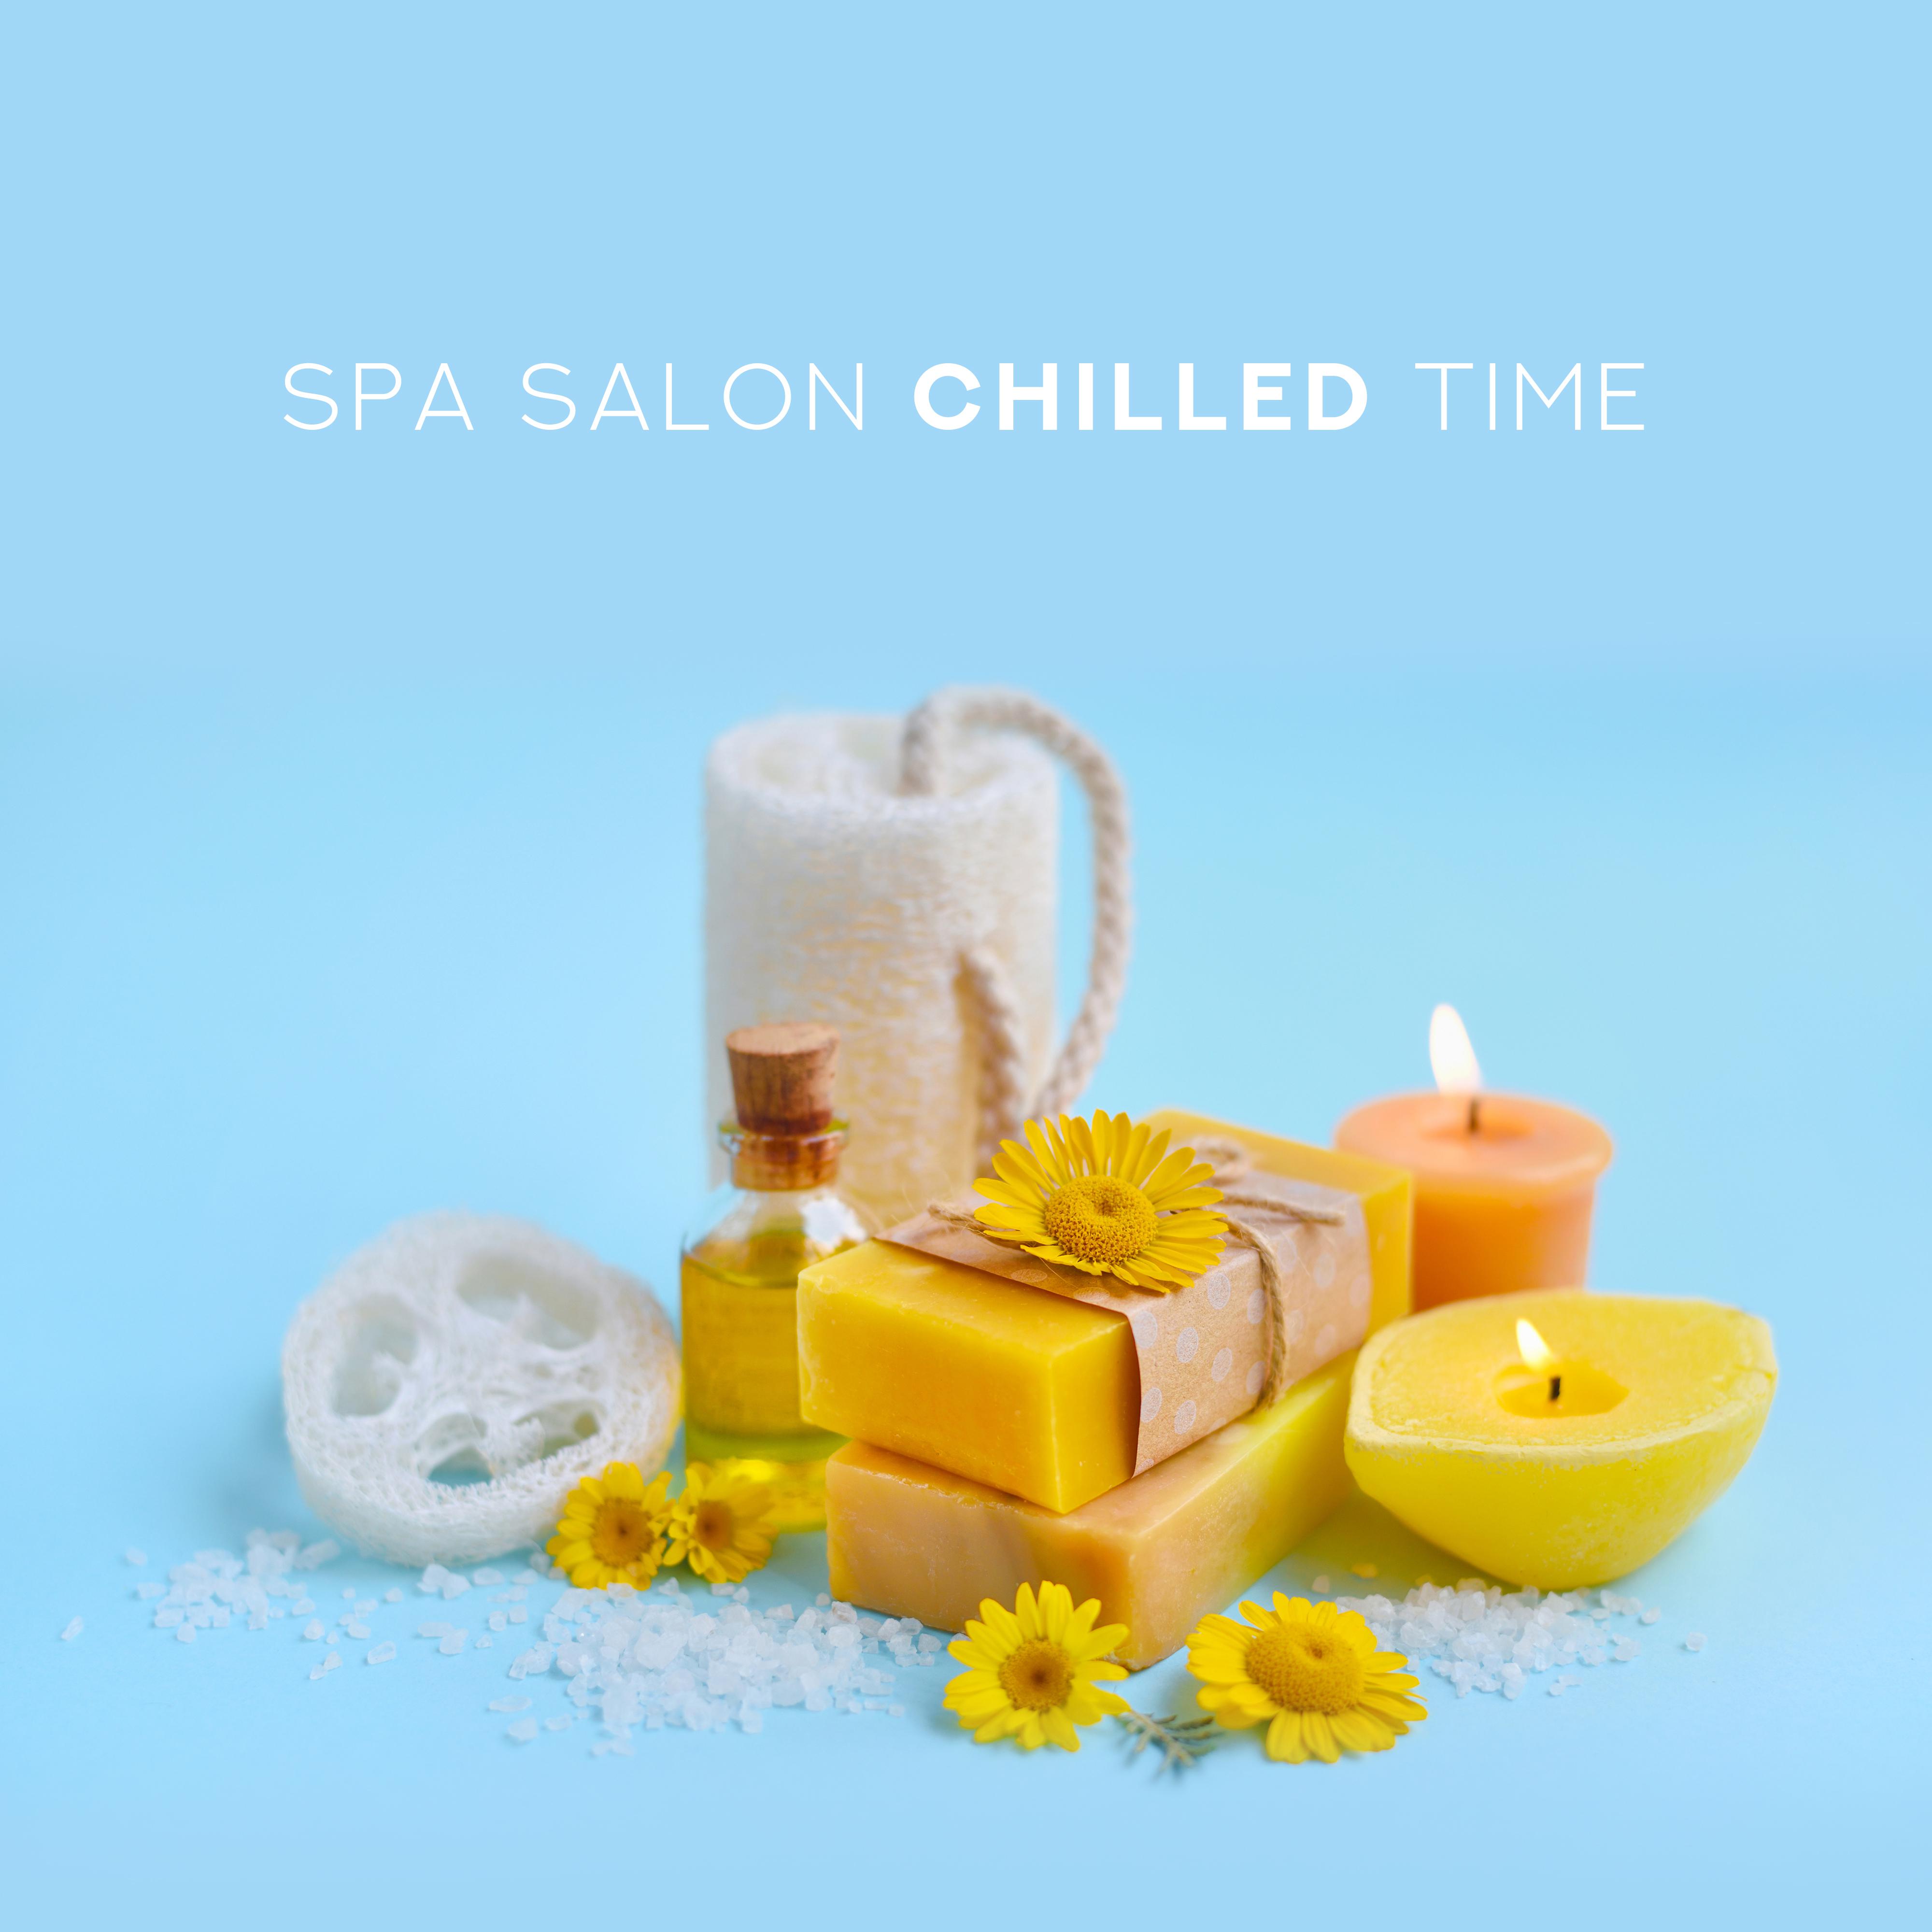 Spa Salon Chilled Time: Best 2019 New Age Music fo Spa Relaxation, Wellness, Massage Therapy, Hot Bath, Sauna